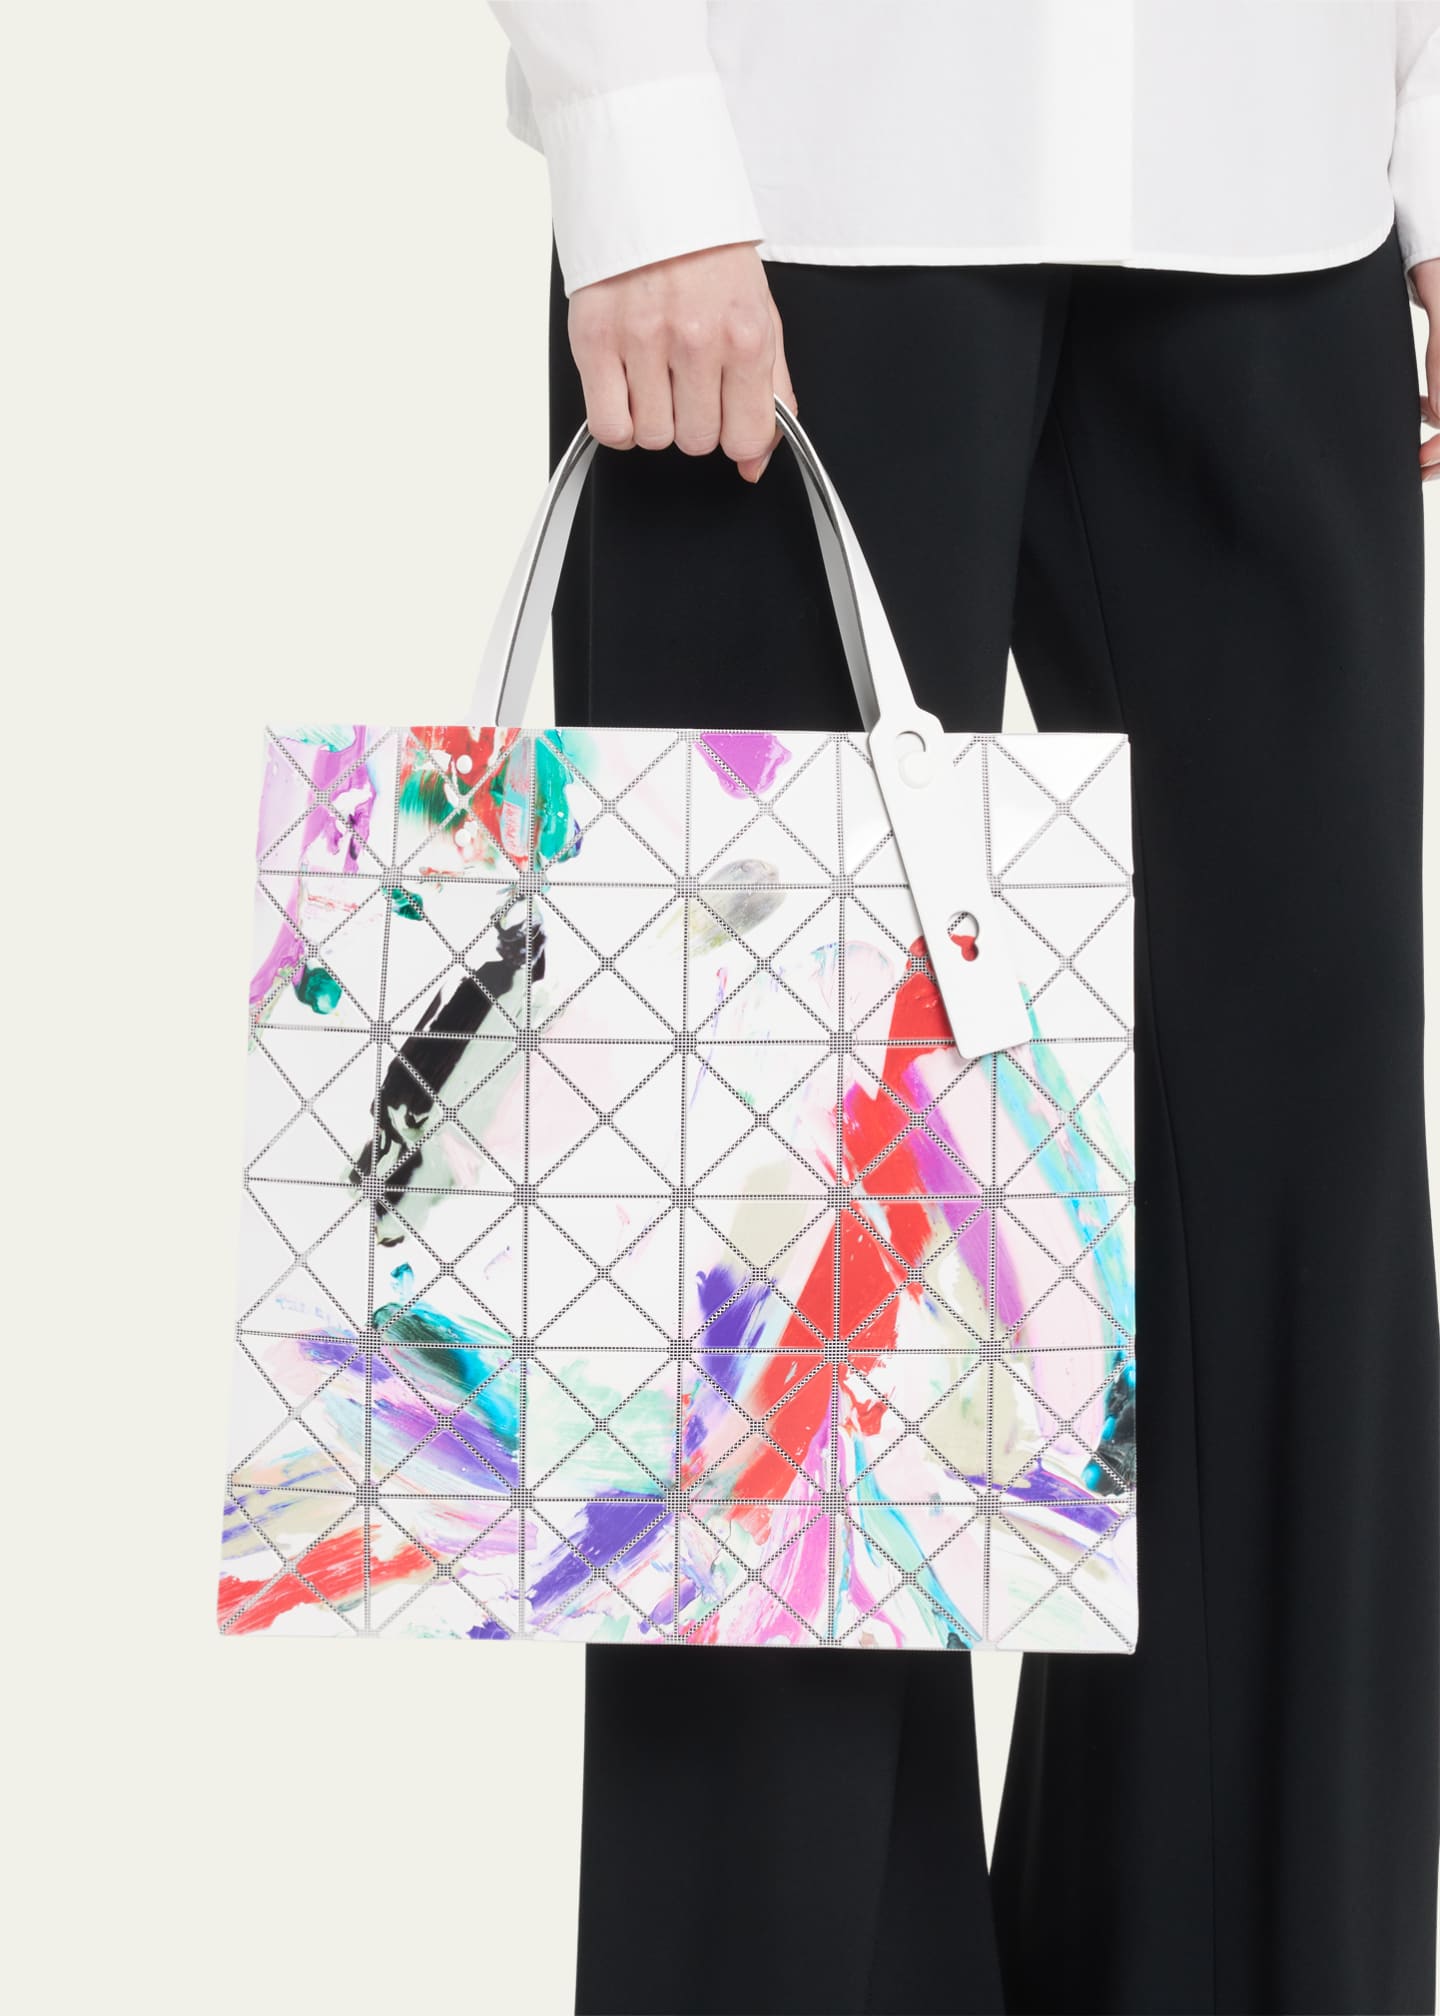 Pleats Please by Issey Miyake Palette Tote